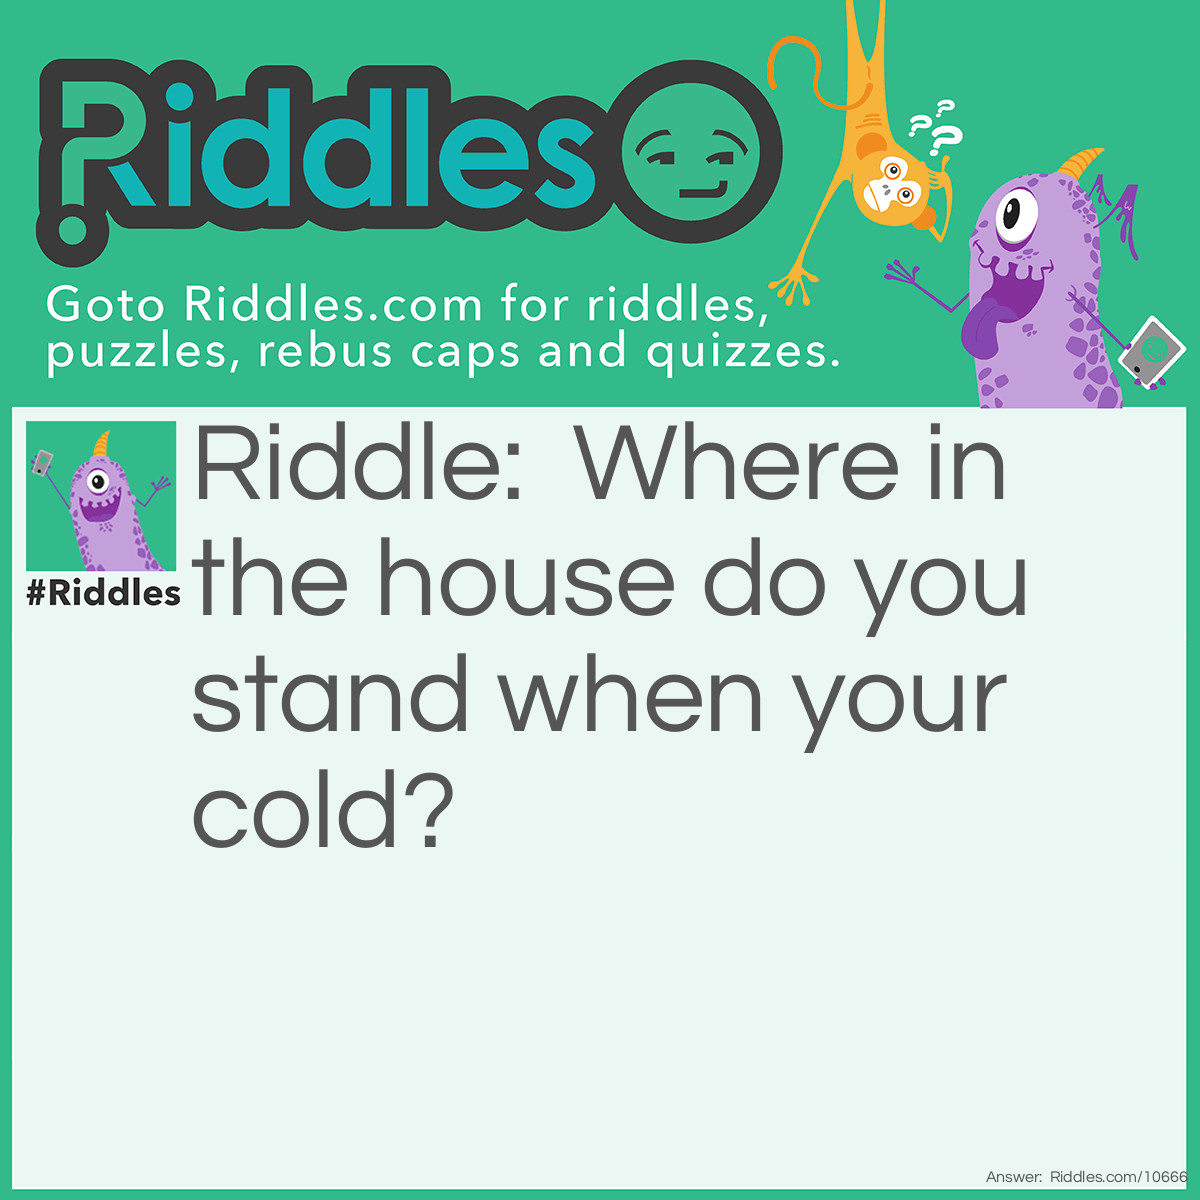 Riddle: Where in the house do you stand when your cold? Answer: The corner because it's 90 degrees.